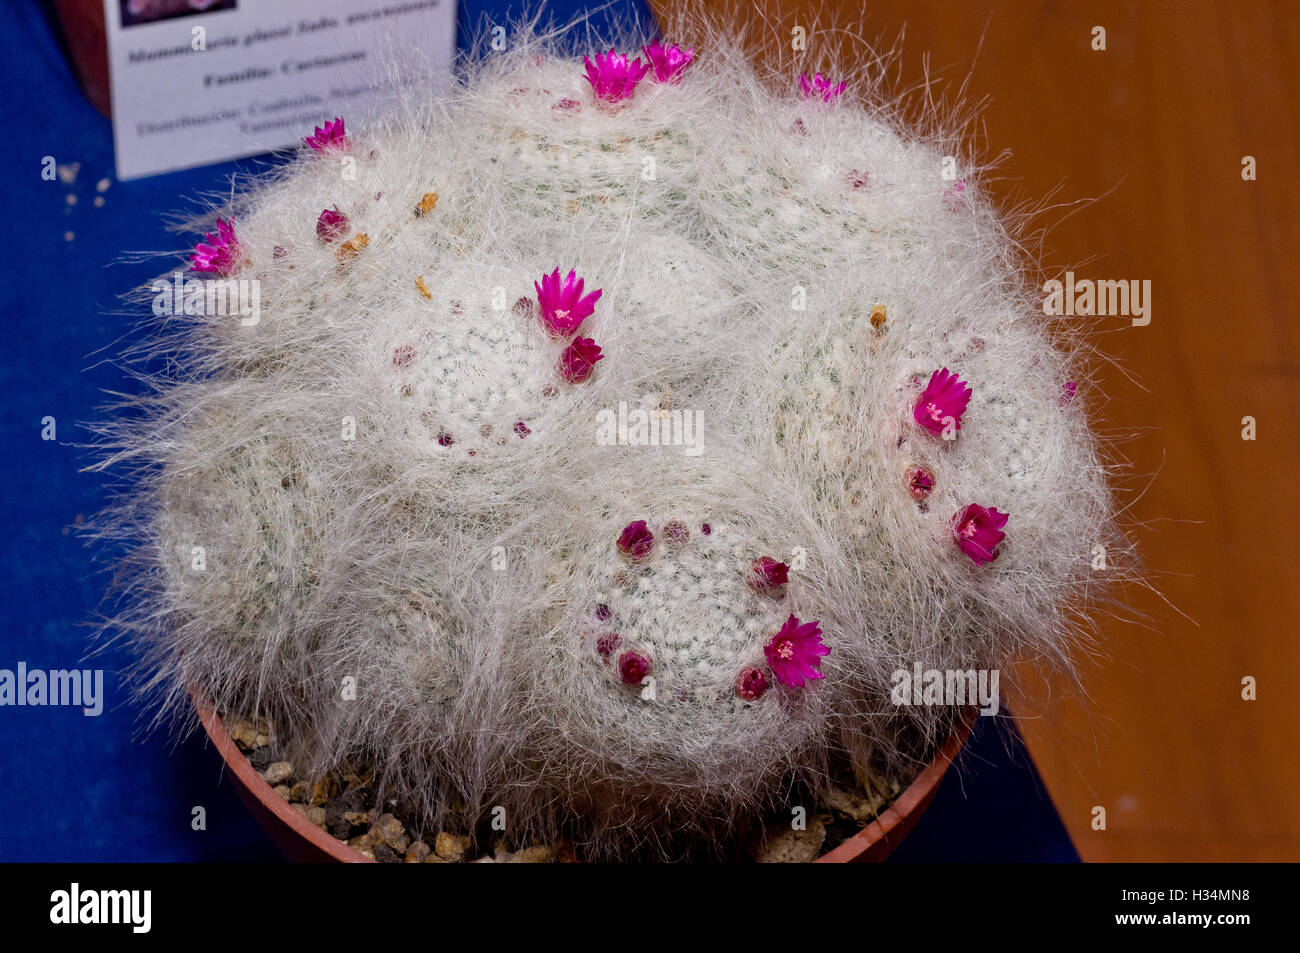 Mammillaria hahniana (old lady puncushion) with flowers during a cactus exhibition Stock Photo